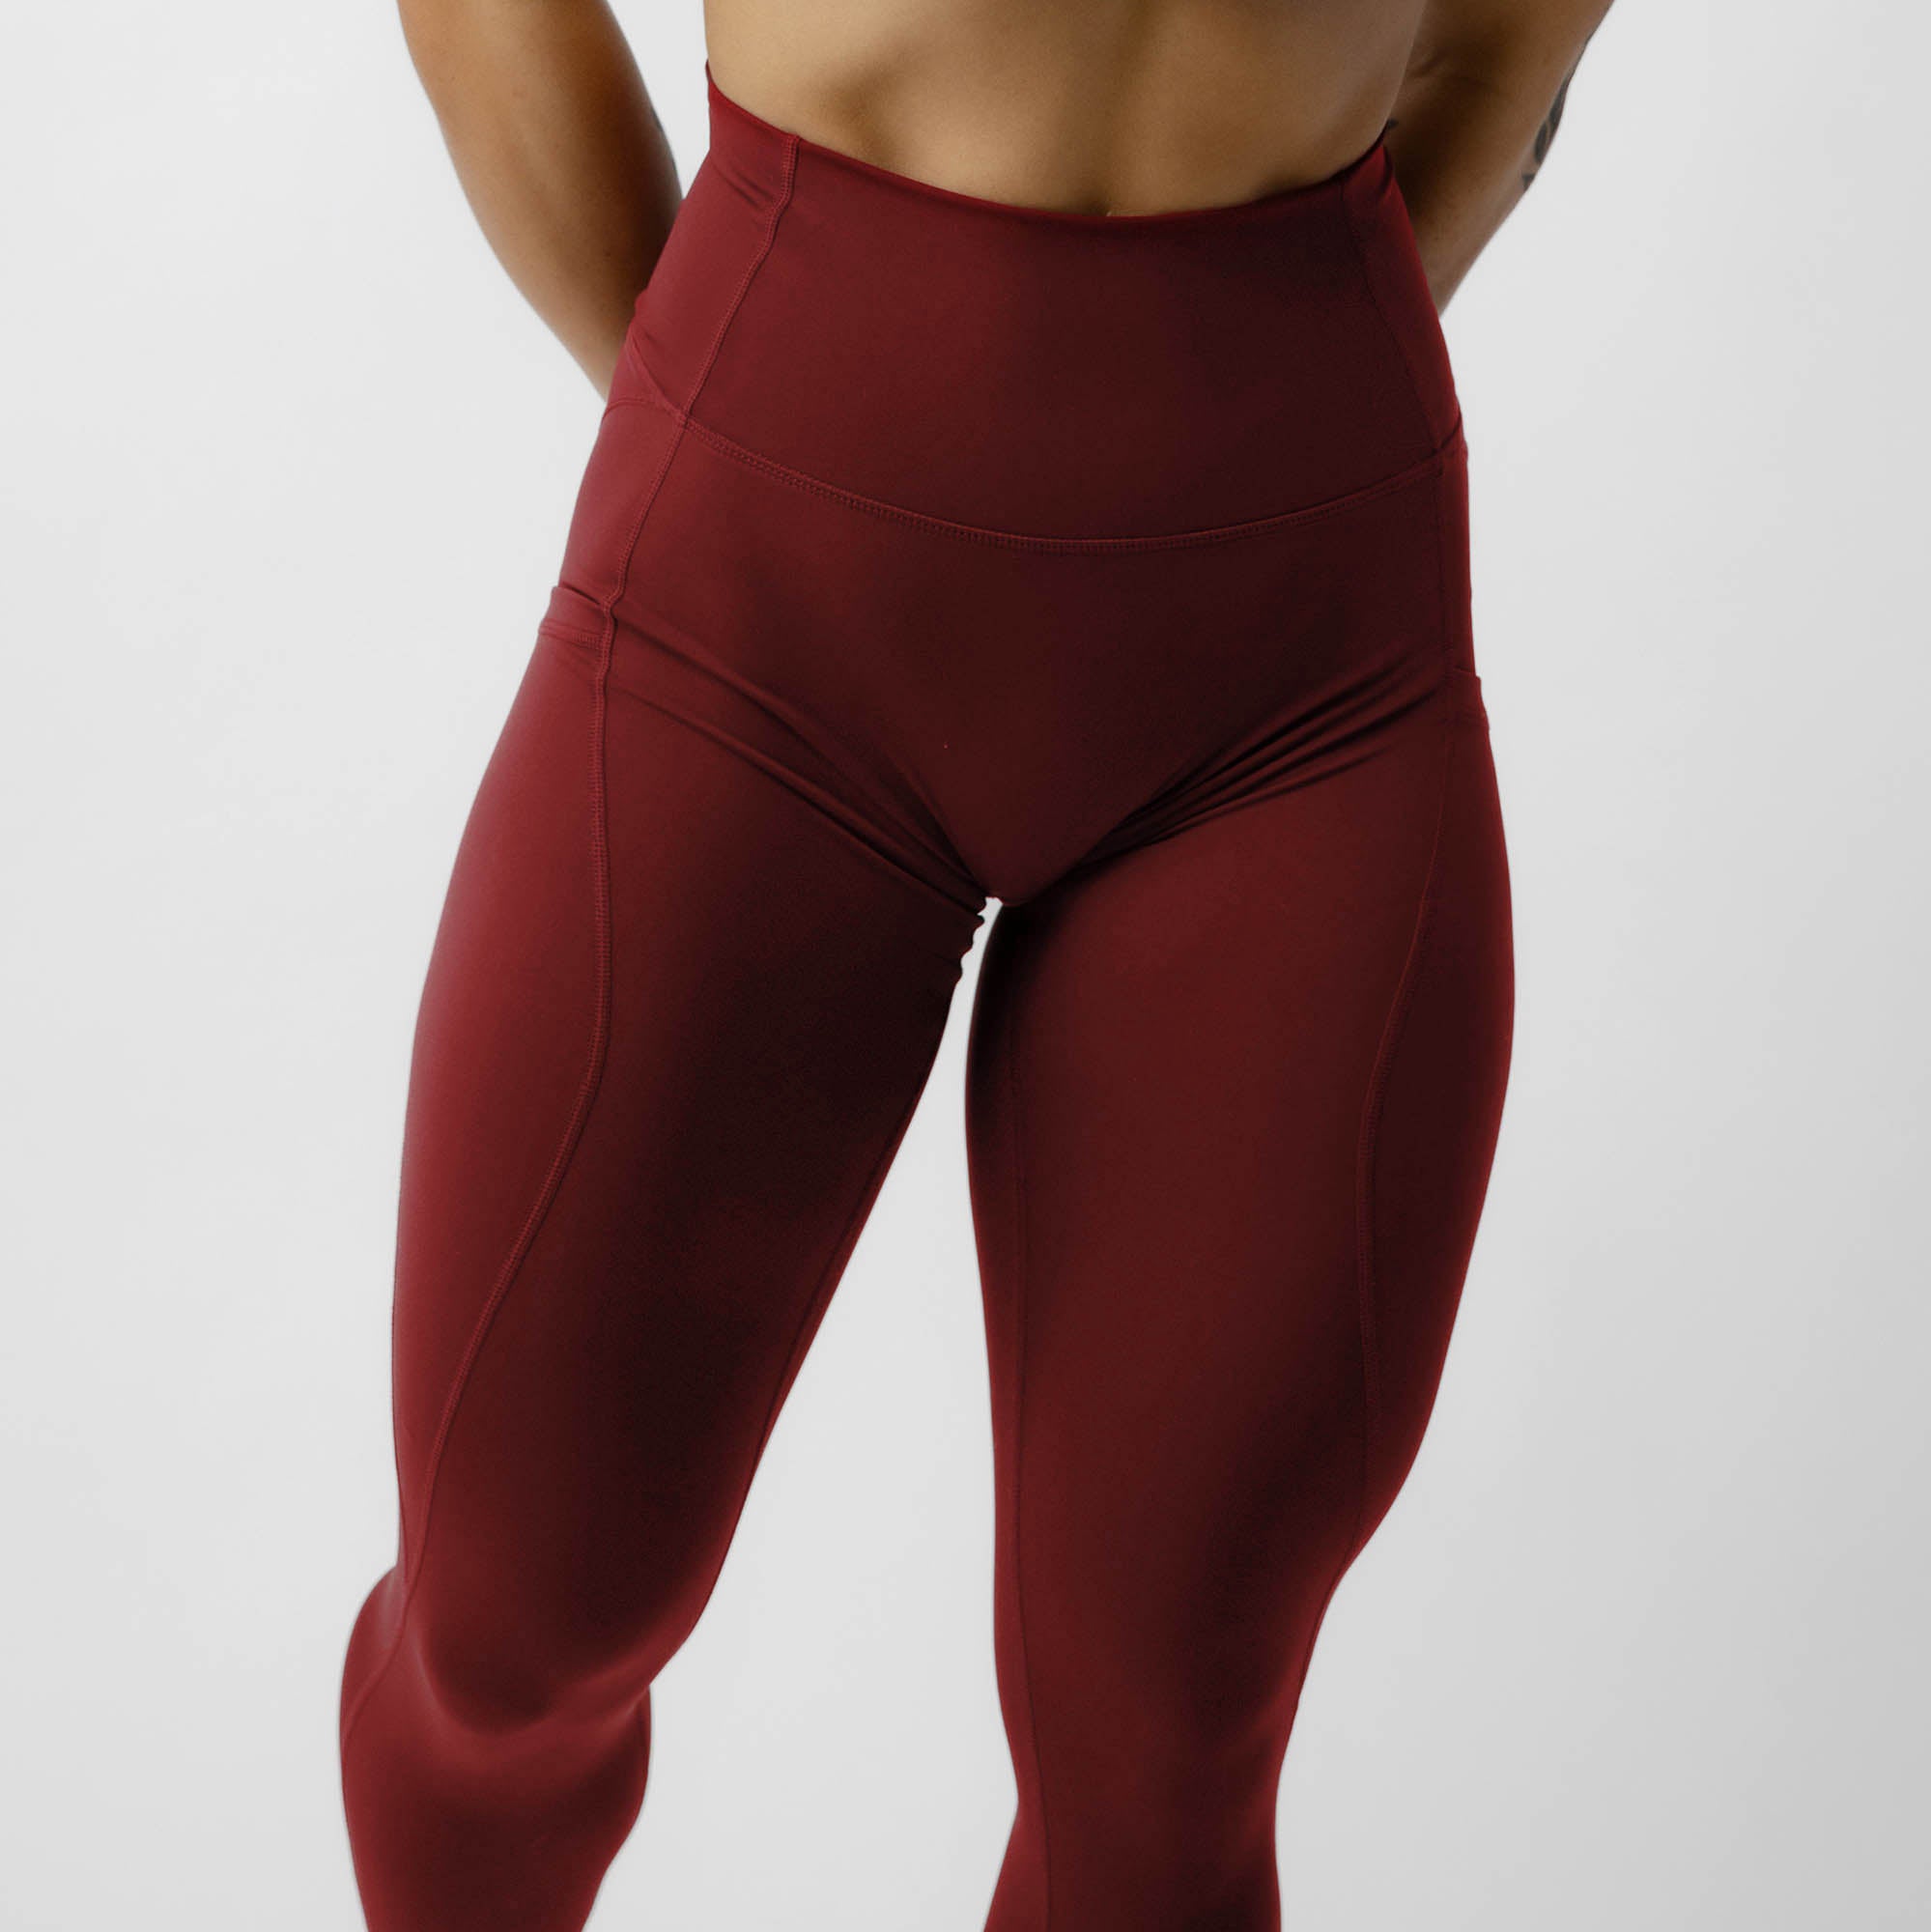 ember red victory legging front detail